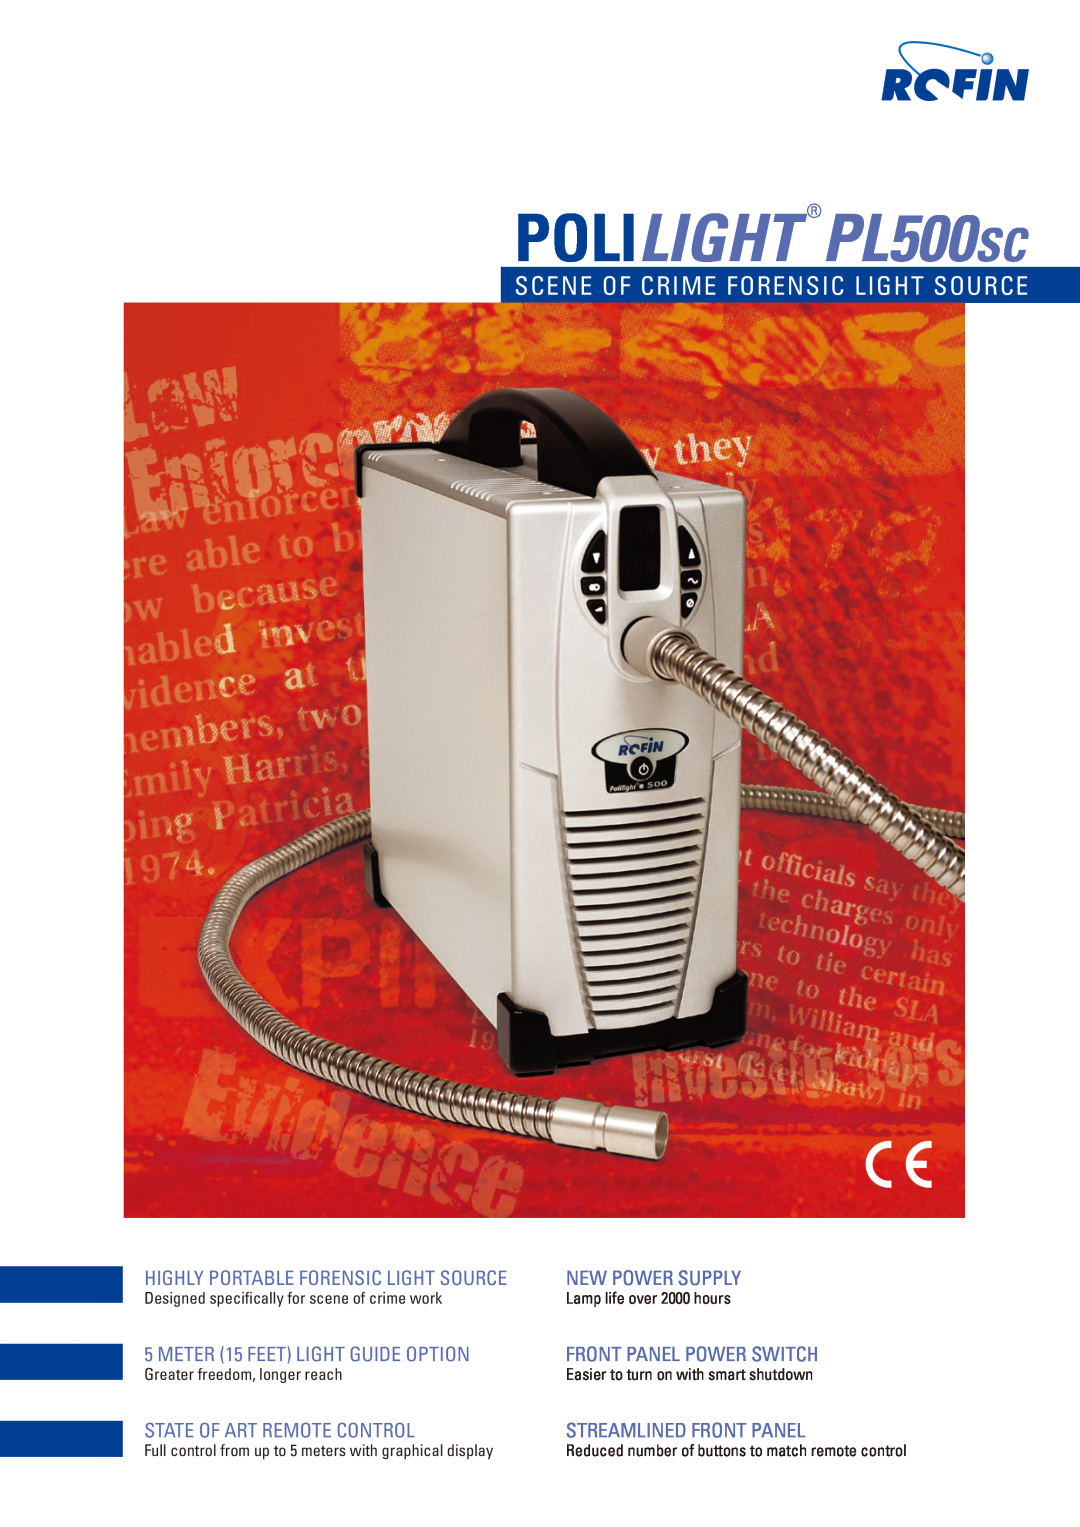 Cabletron Systems manual POLILIGHT PL500sc, Scene of crime forensic light source, New Power Supply 